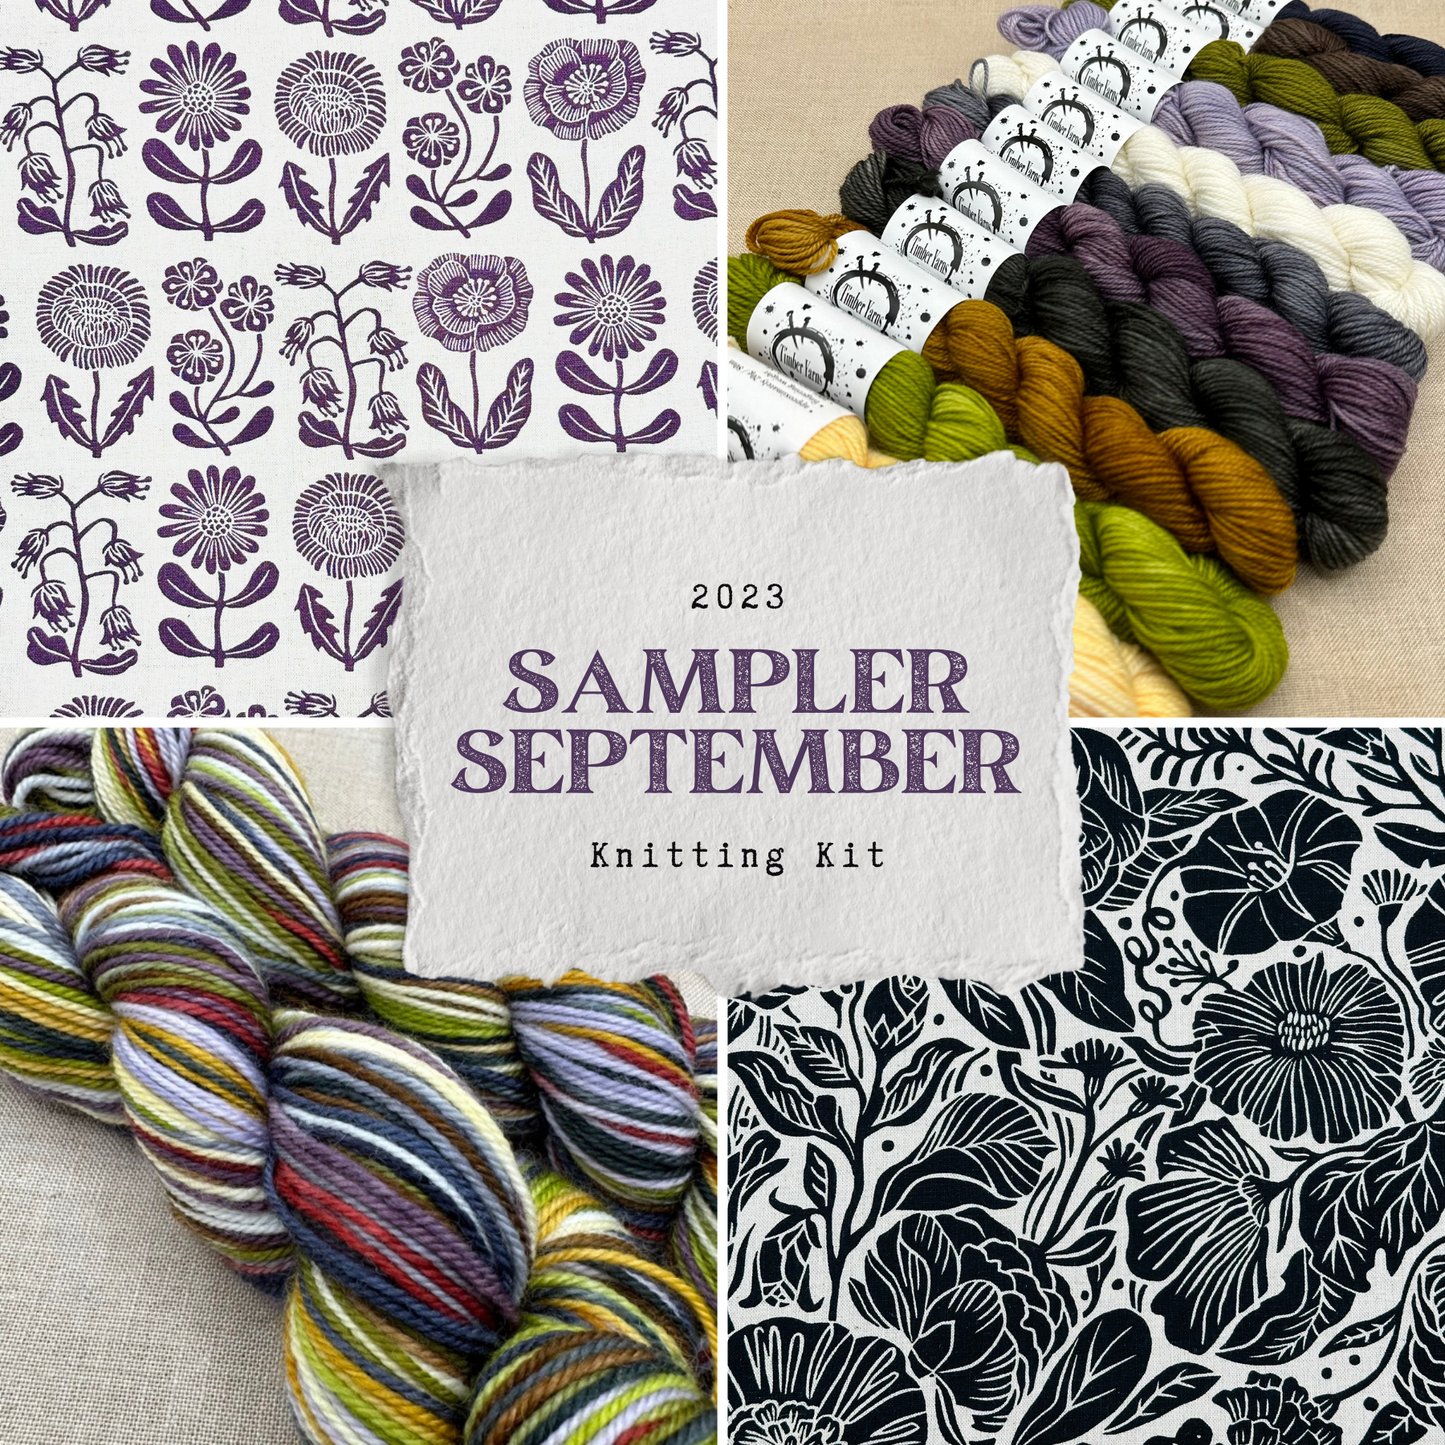 Maximum Cross Stitch, Evertote, Roxy Floss Co, and Timber Yarns - Sampler September 2023 Knitting Kit with Wedgetote Bag Set